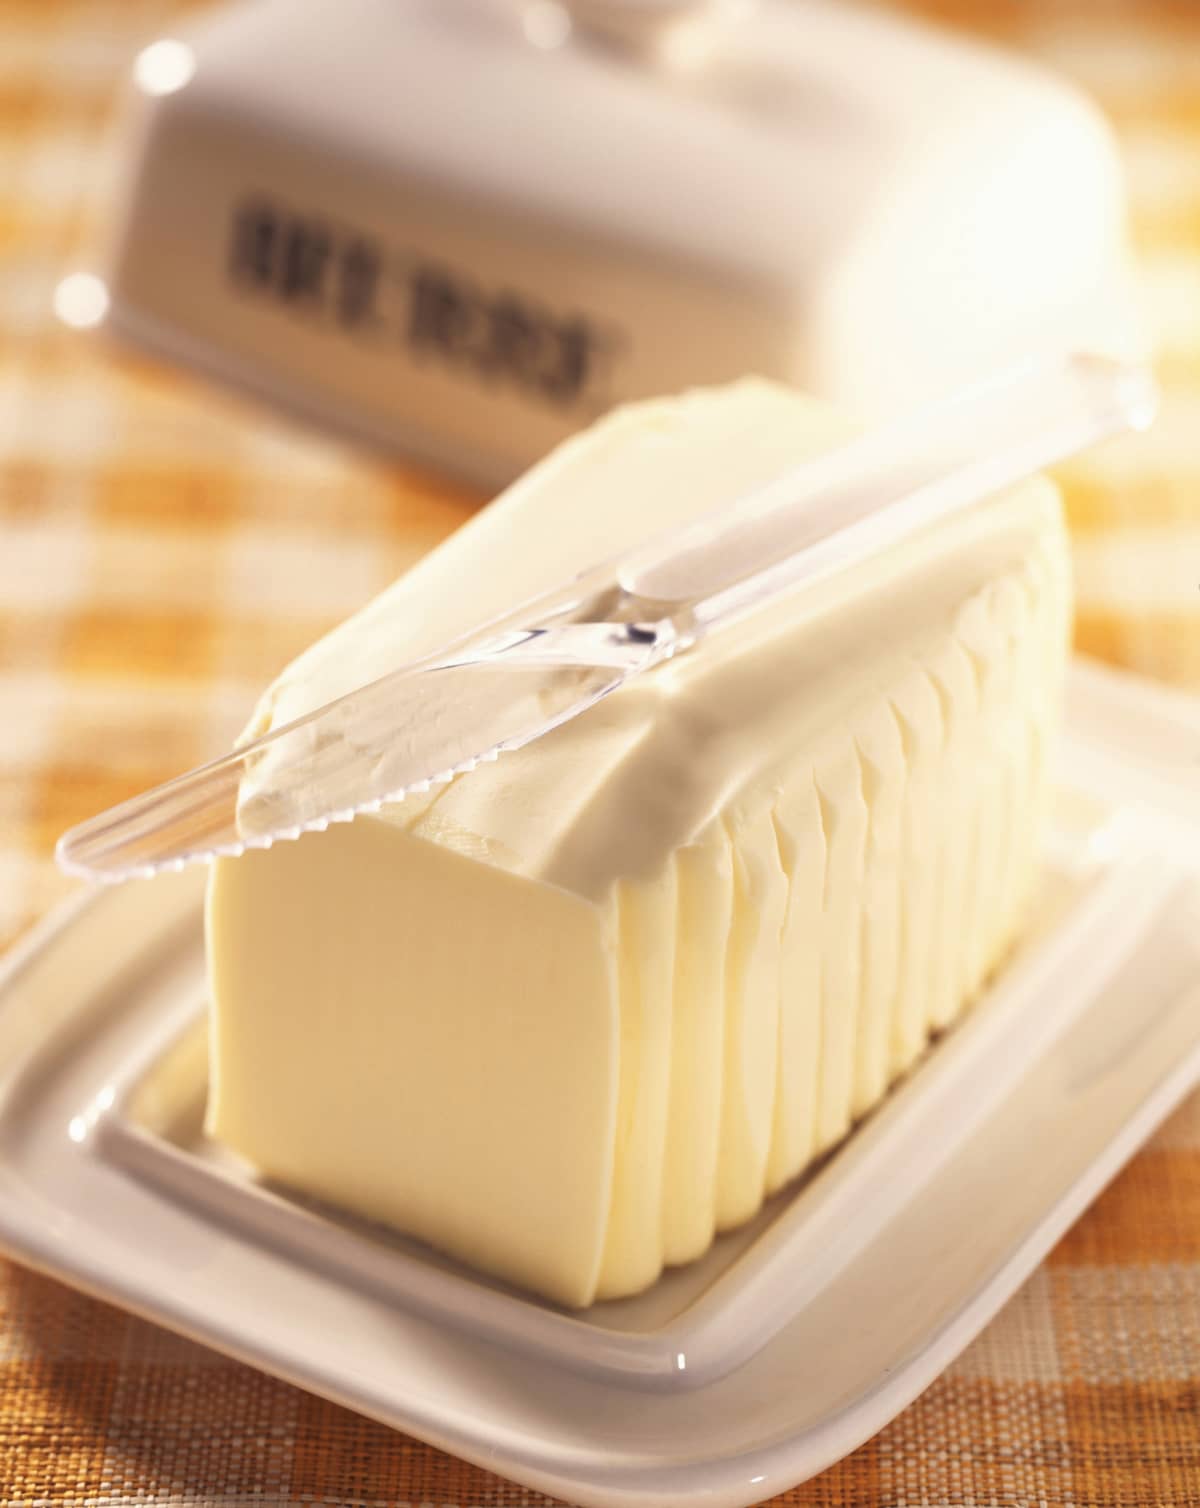 Knife on top of butter in butter dish